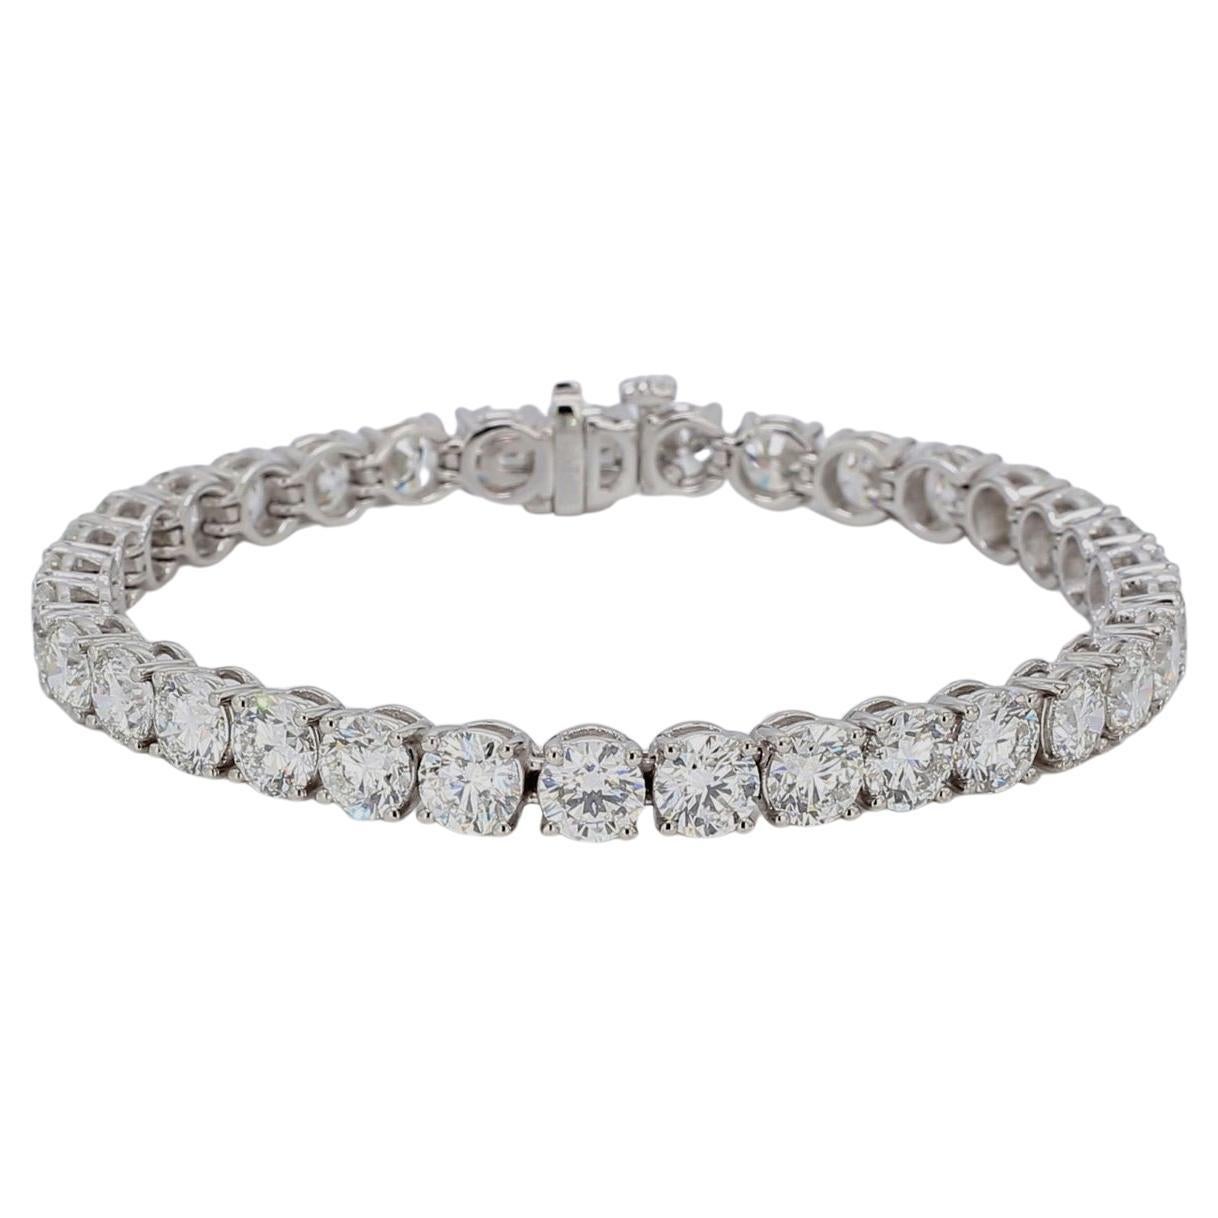 
- 8.29 carats of diamonds for fantastic, substantial sparkle!

- All the diamonds are bright white and eye clean

- Very good to excellent cut diamonds

- Sturdy and solid construction

- Natural, earth mined diamonds

Dimensions:

7 inches in